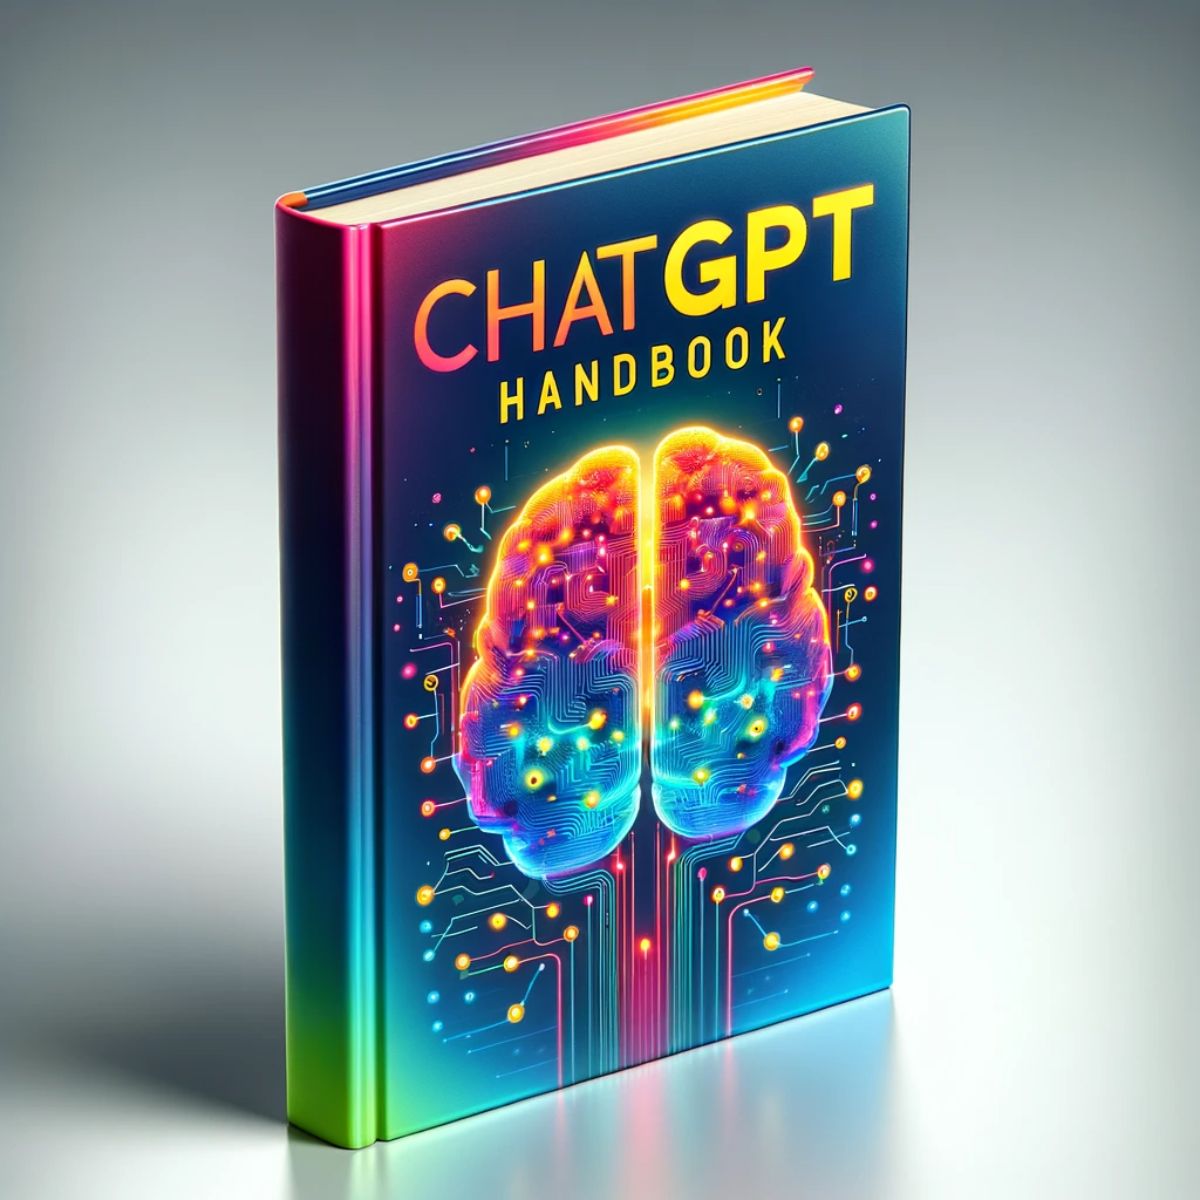 Get Ultimate ChatGPT Handbook [100% FREE]. Make money with ChatGPT In this free guide, you’ll find: ✅ 18 Ways to Make Money ✅ 1500 ChatGPT Prompts ✅ 100+ Essential AI Tools 📌 To get this free guide: 1. Repost this post 2. Comment 'Send' 3. Follow me for DM